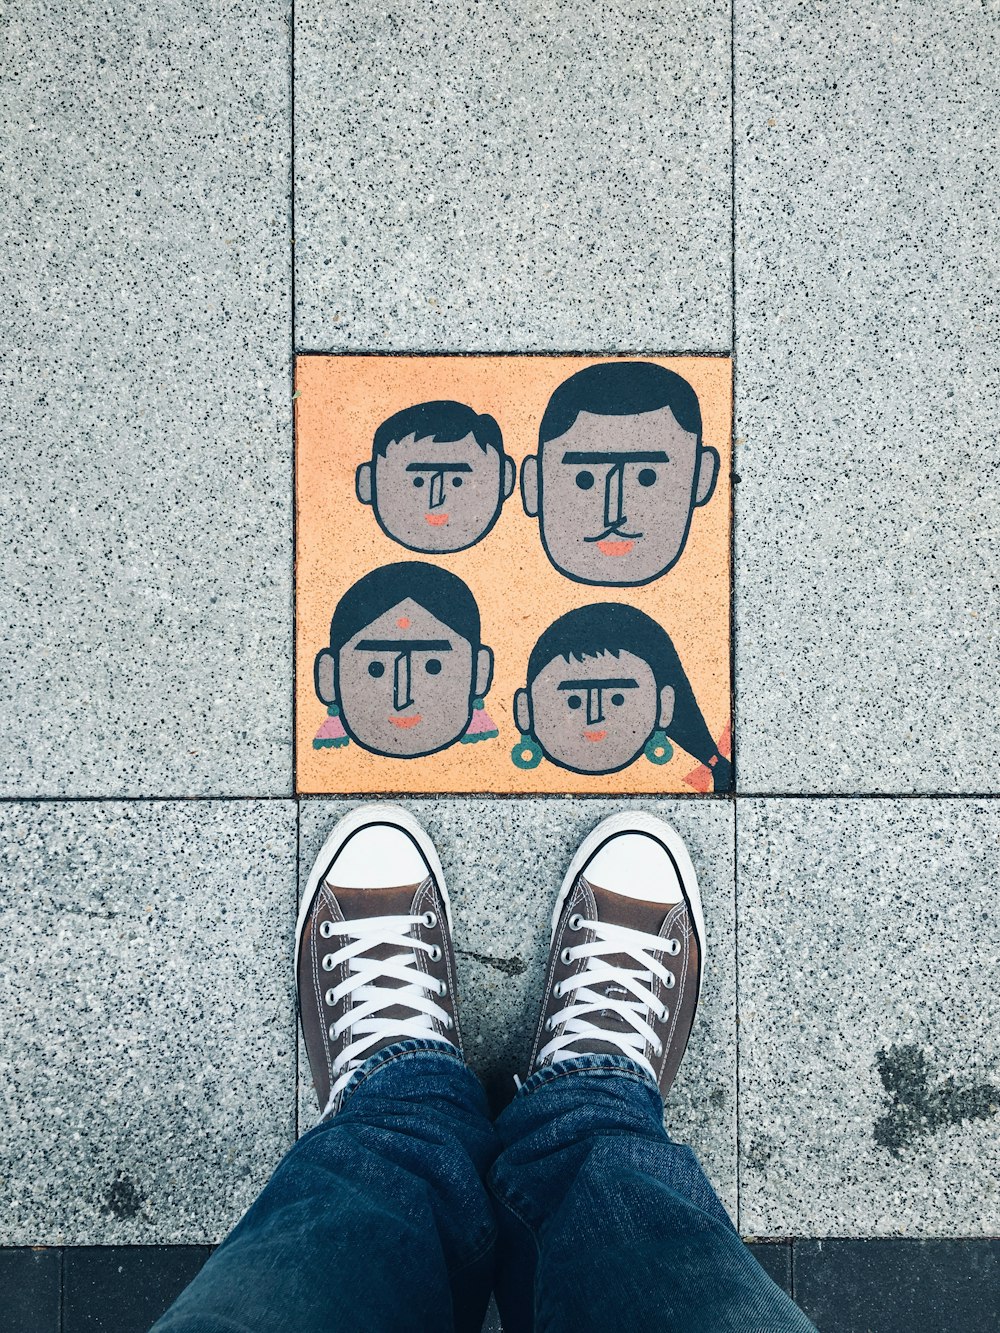 person standing on pavement with family drawing on it